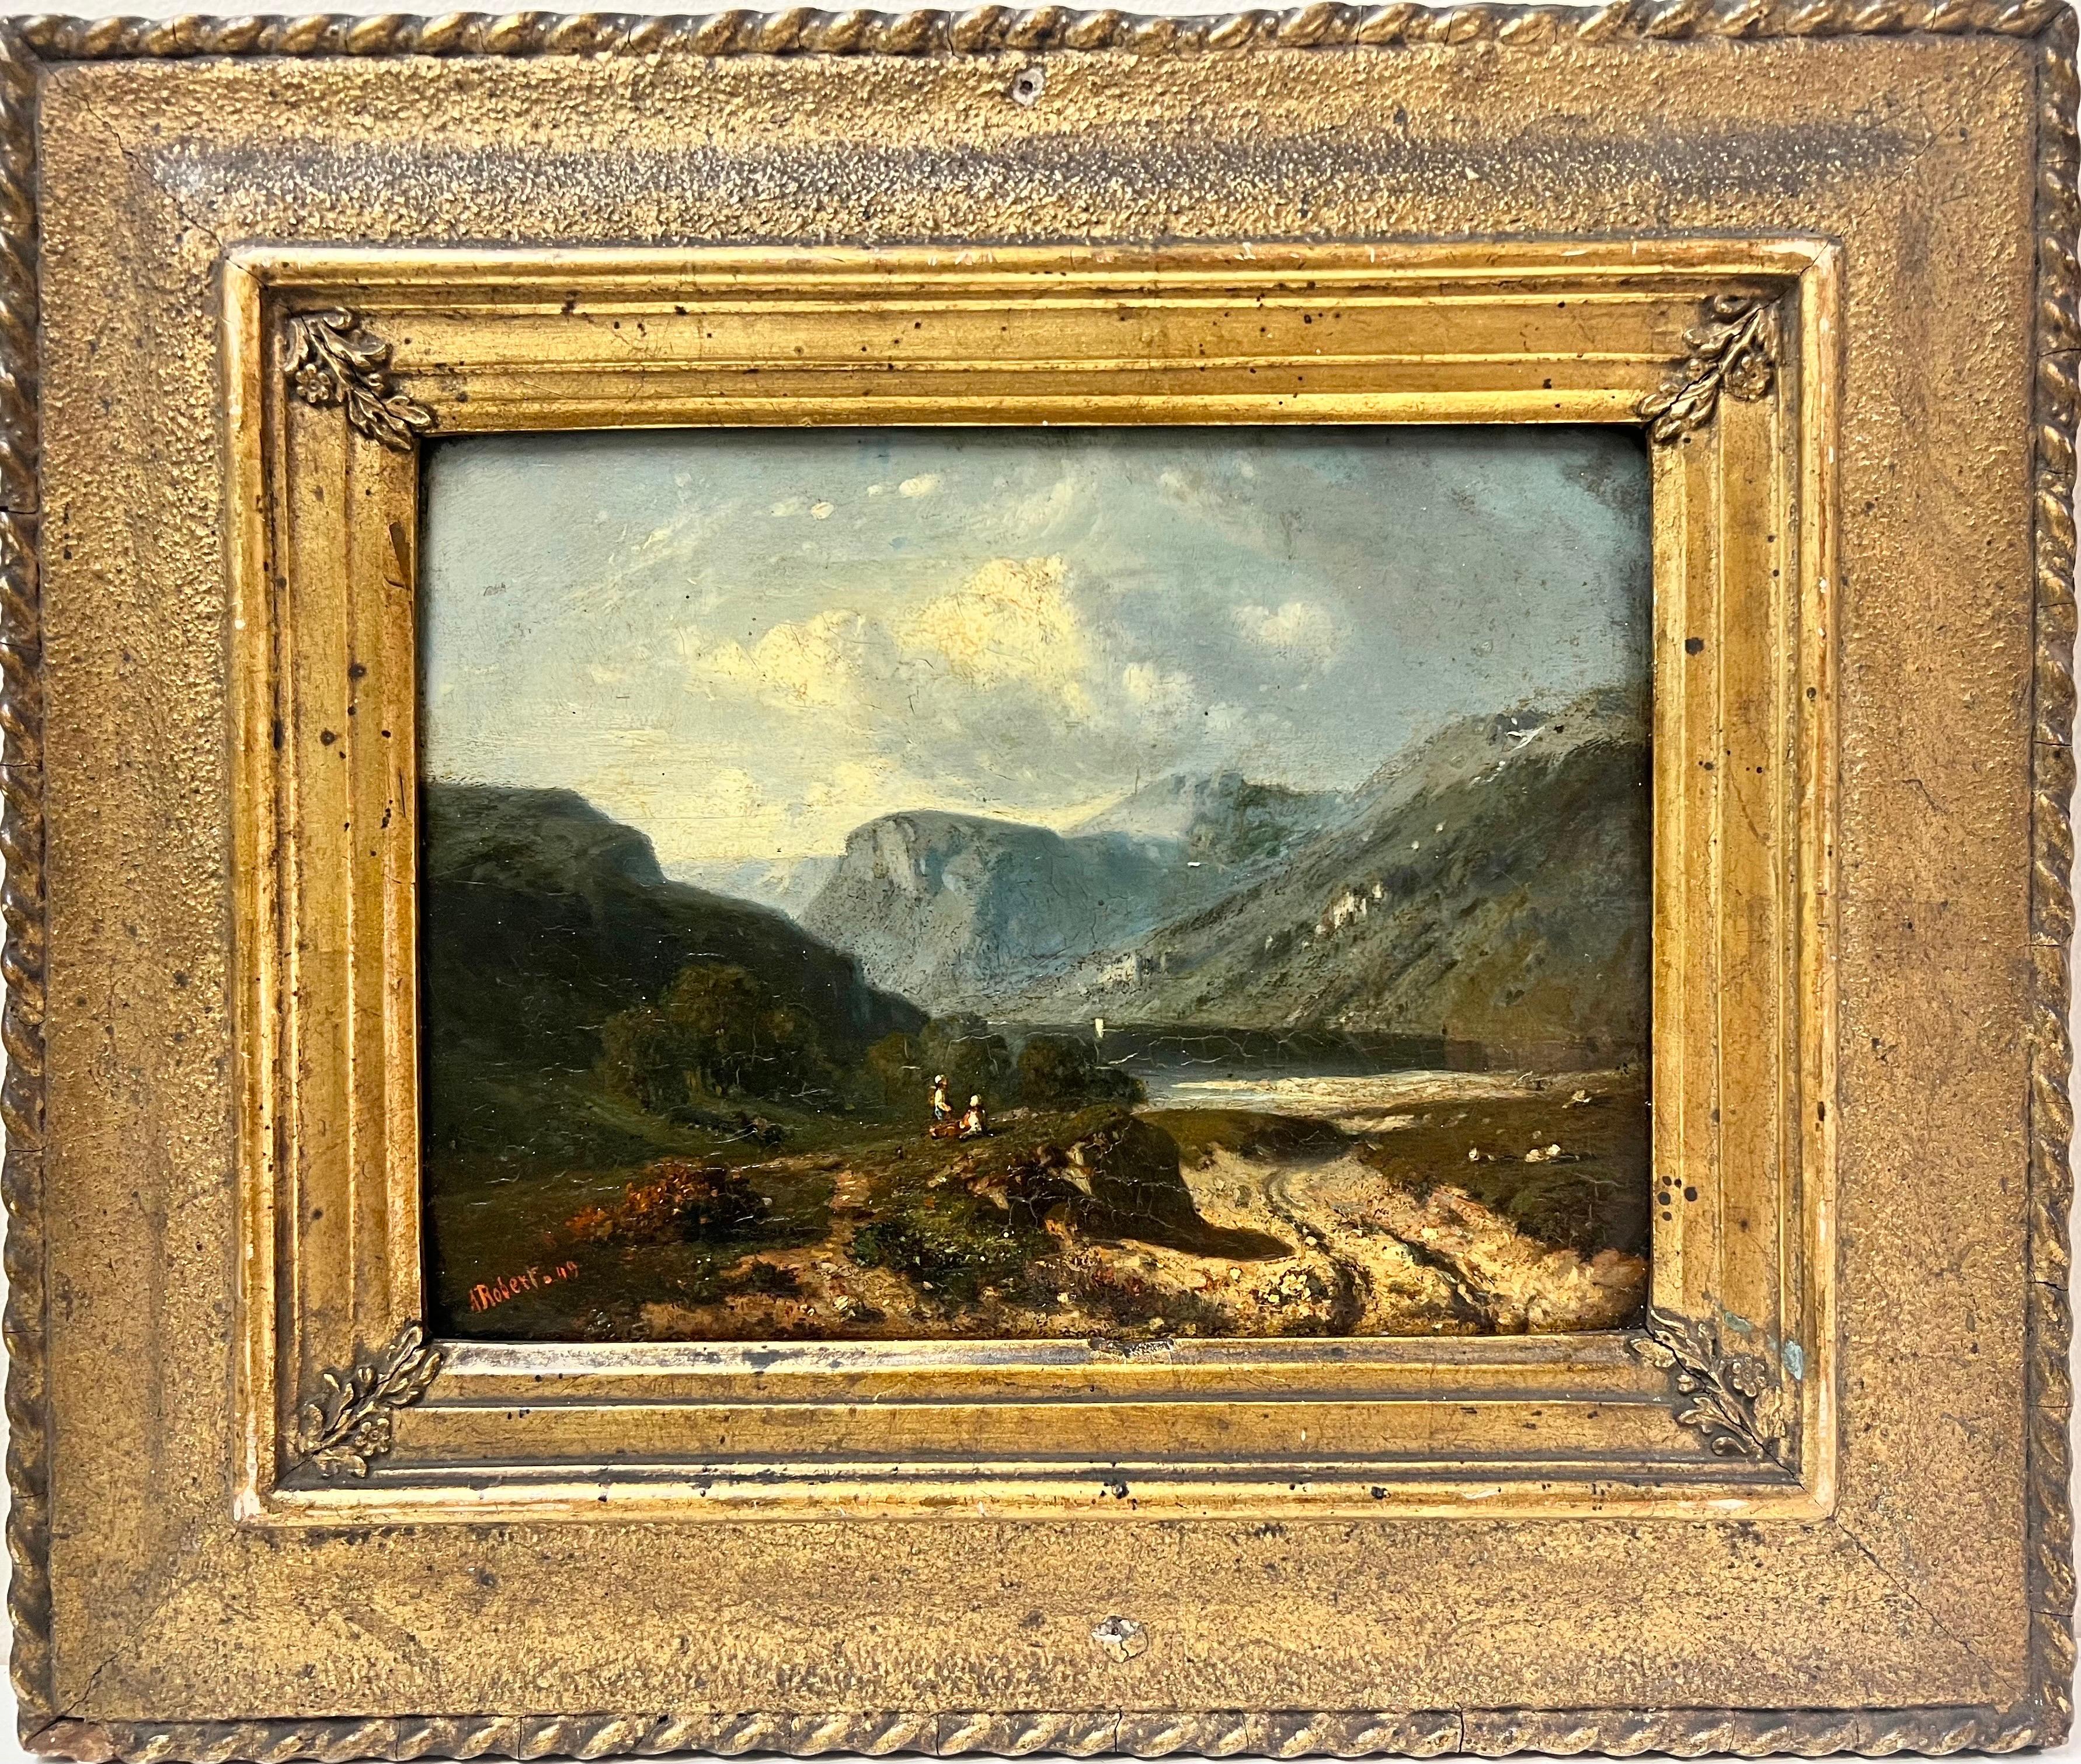 Scottish Antique  Landscape Painting - 19th Century Signed Scottish Highlands Oil Painting Figures in Dramatic View